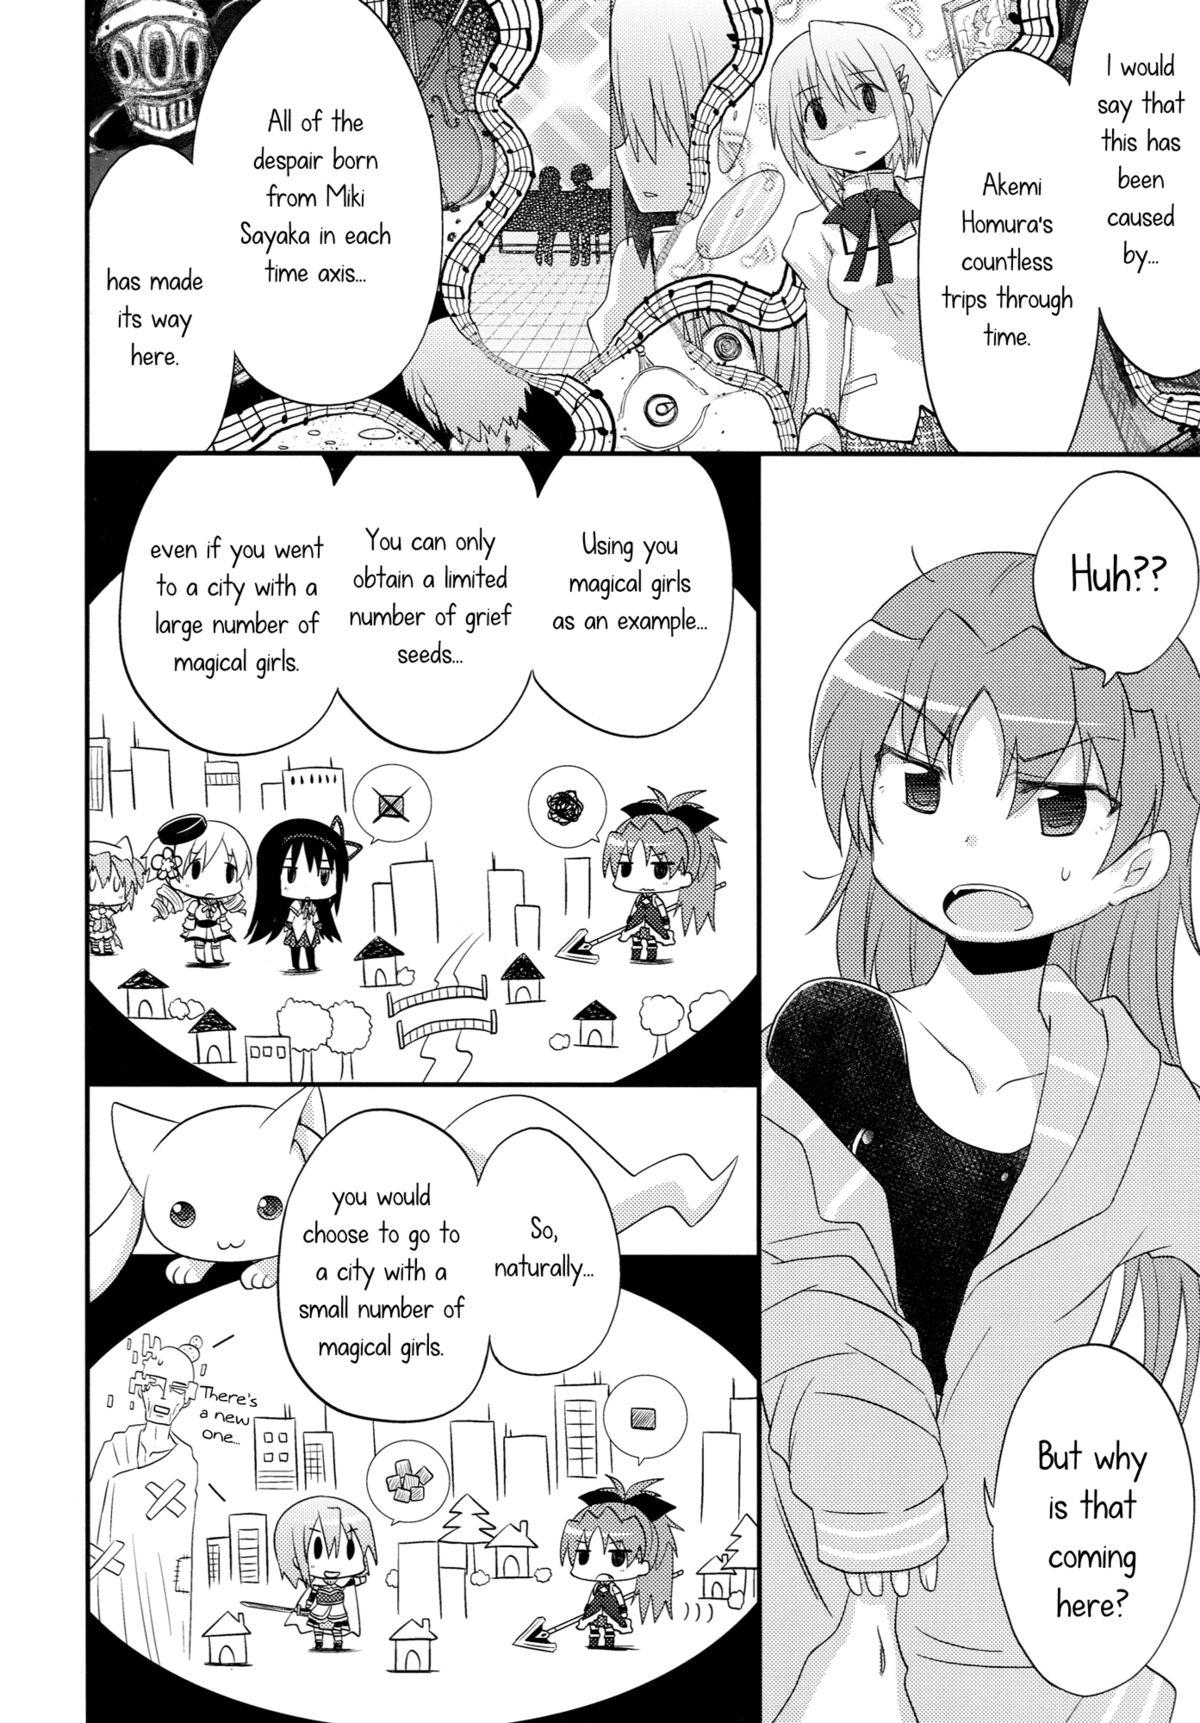 Deep Our Courting War Front - Puella magi madoka magica Gaping - Page 9